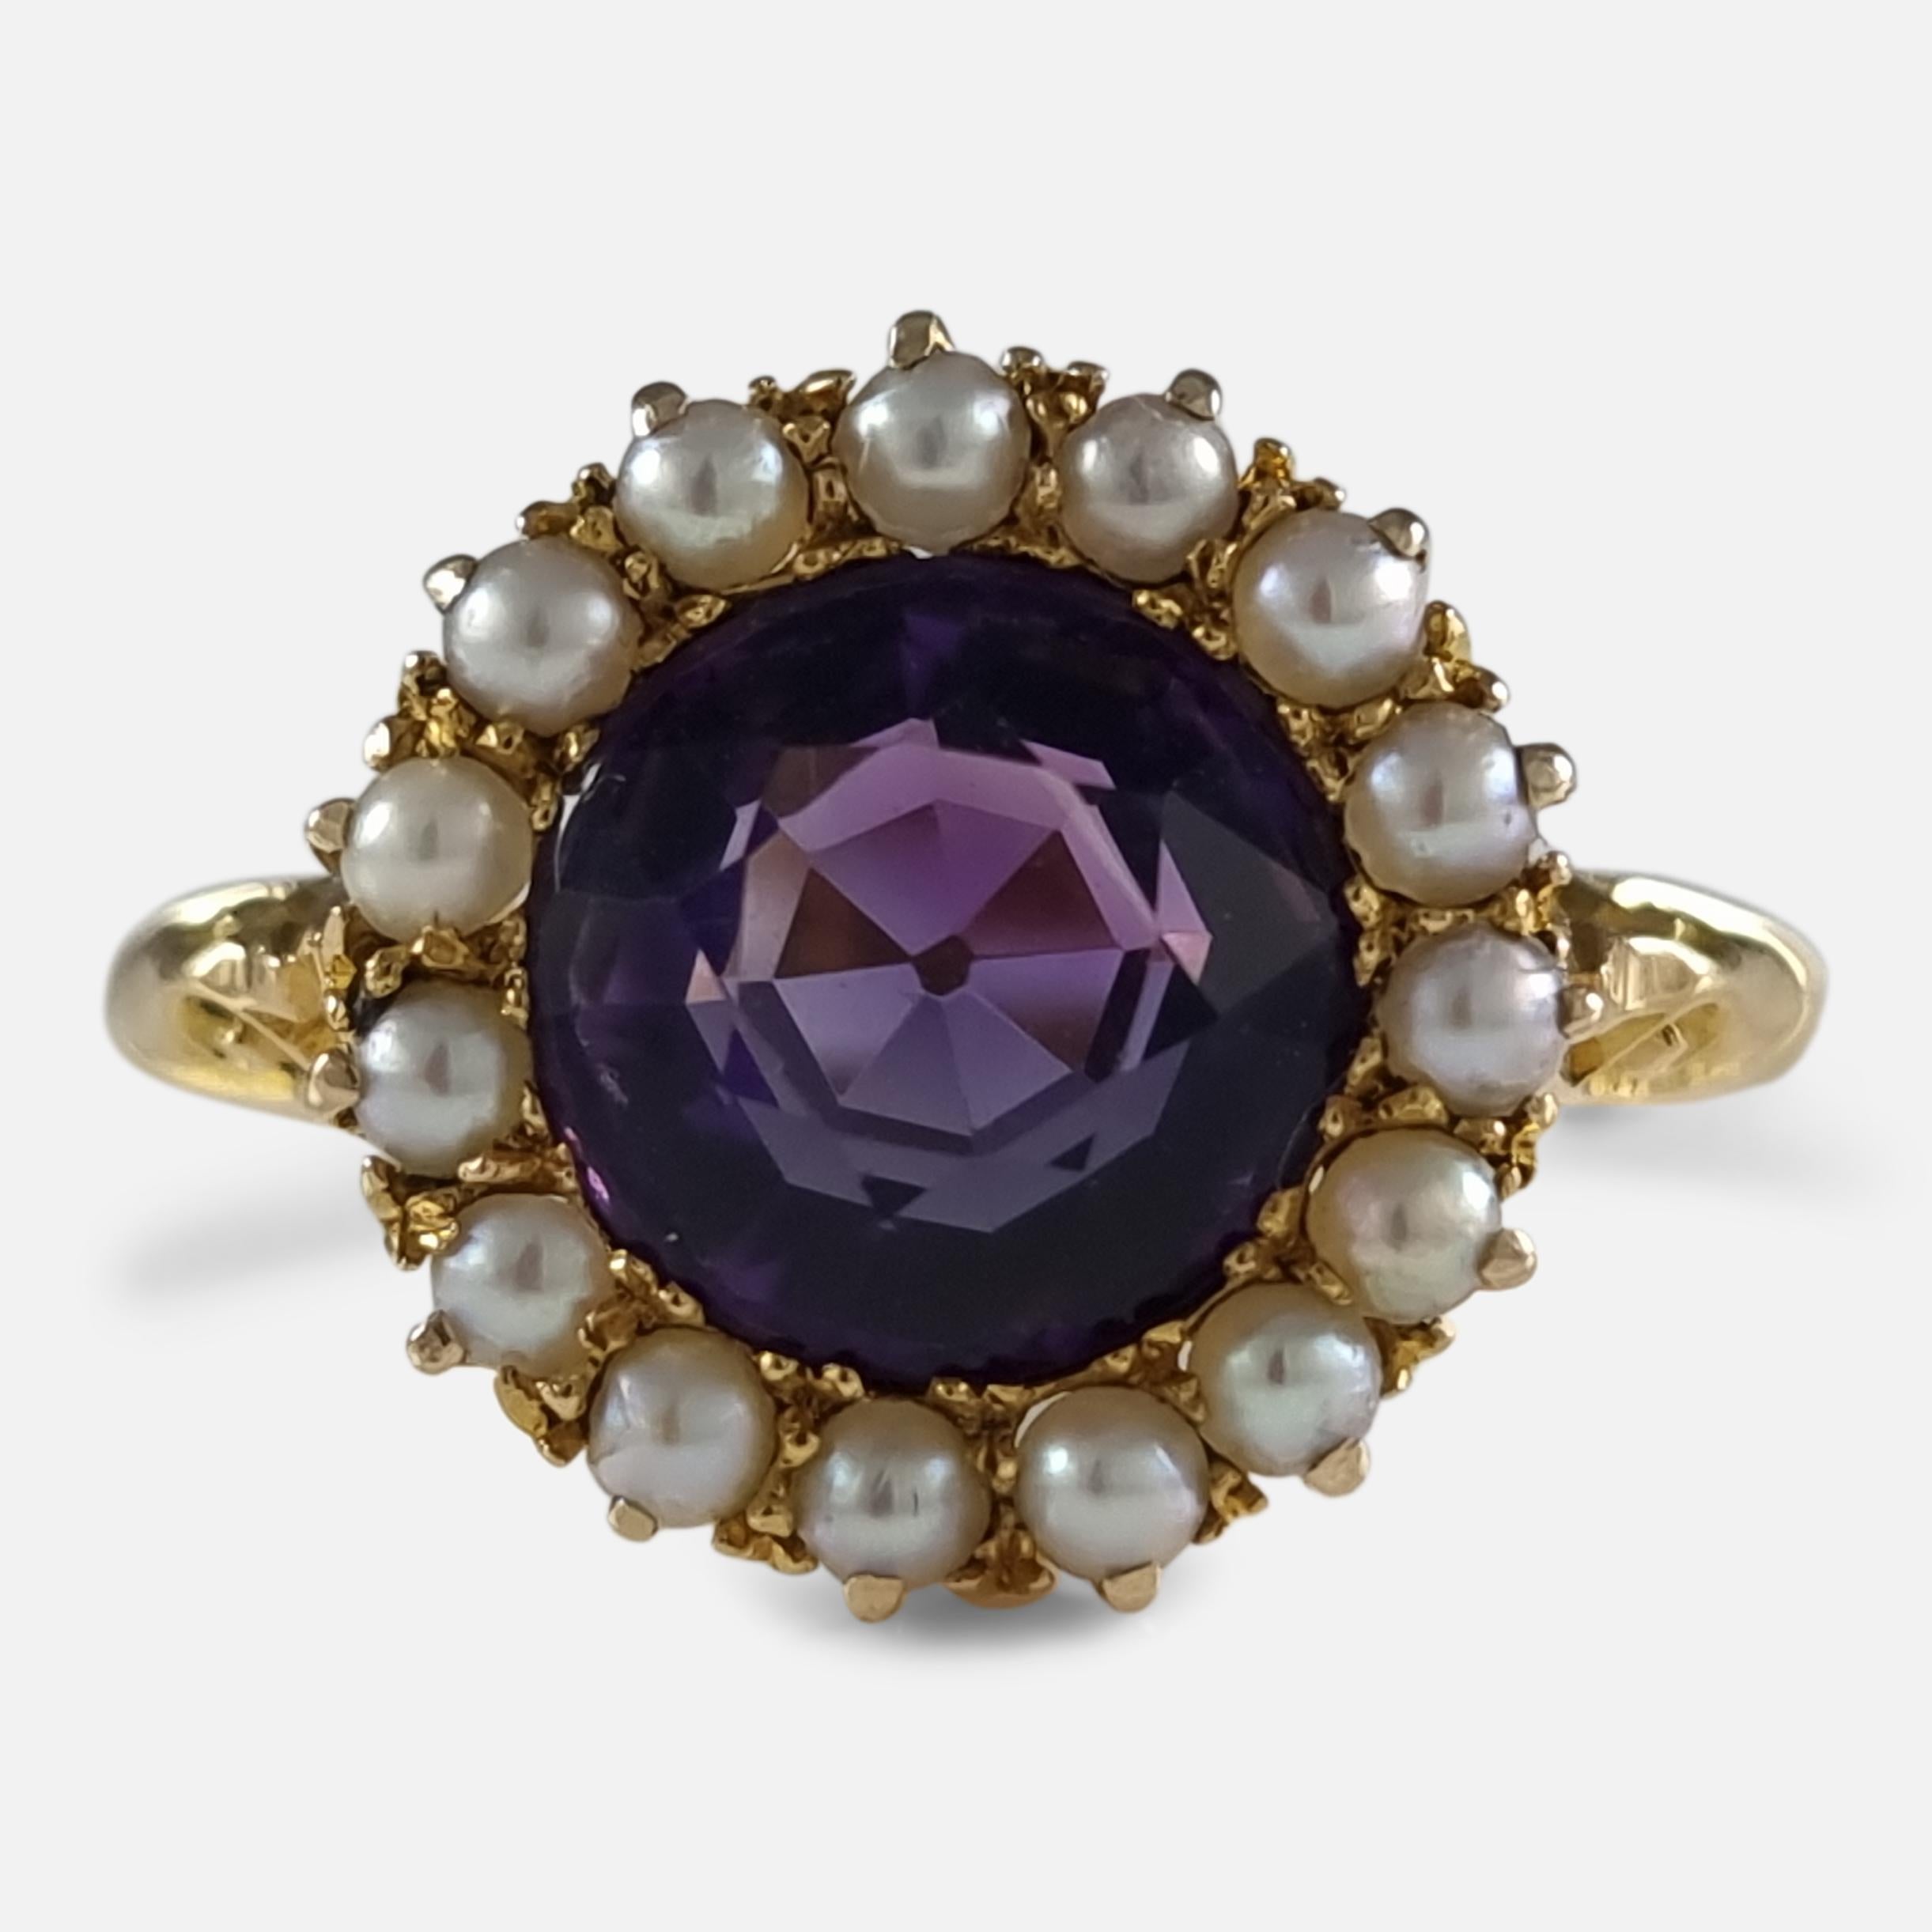 An Edwardian 18ct yellow gold amethyst and seed pearl cluster ring. The ring is set with a central faceted amethyst, surrounded by a further fifteen seed pearls, all within a cluster formation.

The ring is hallmarked with Birmingham assay marks,